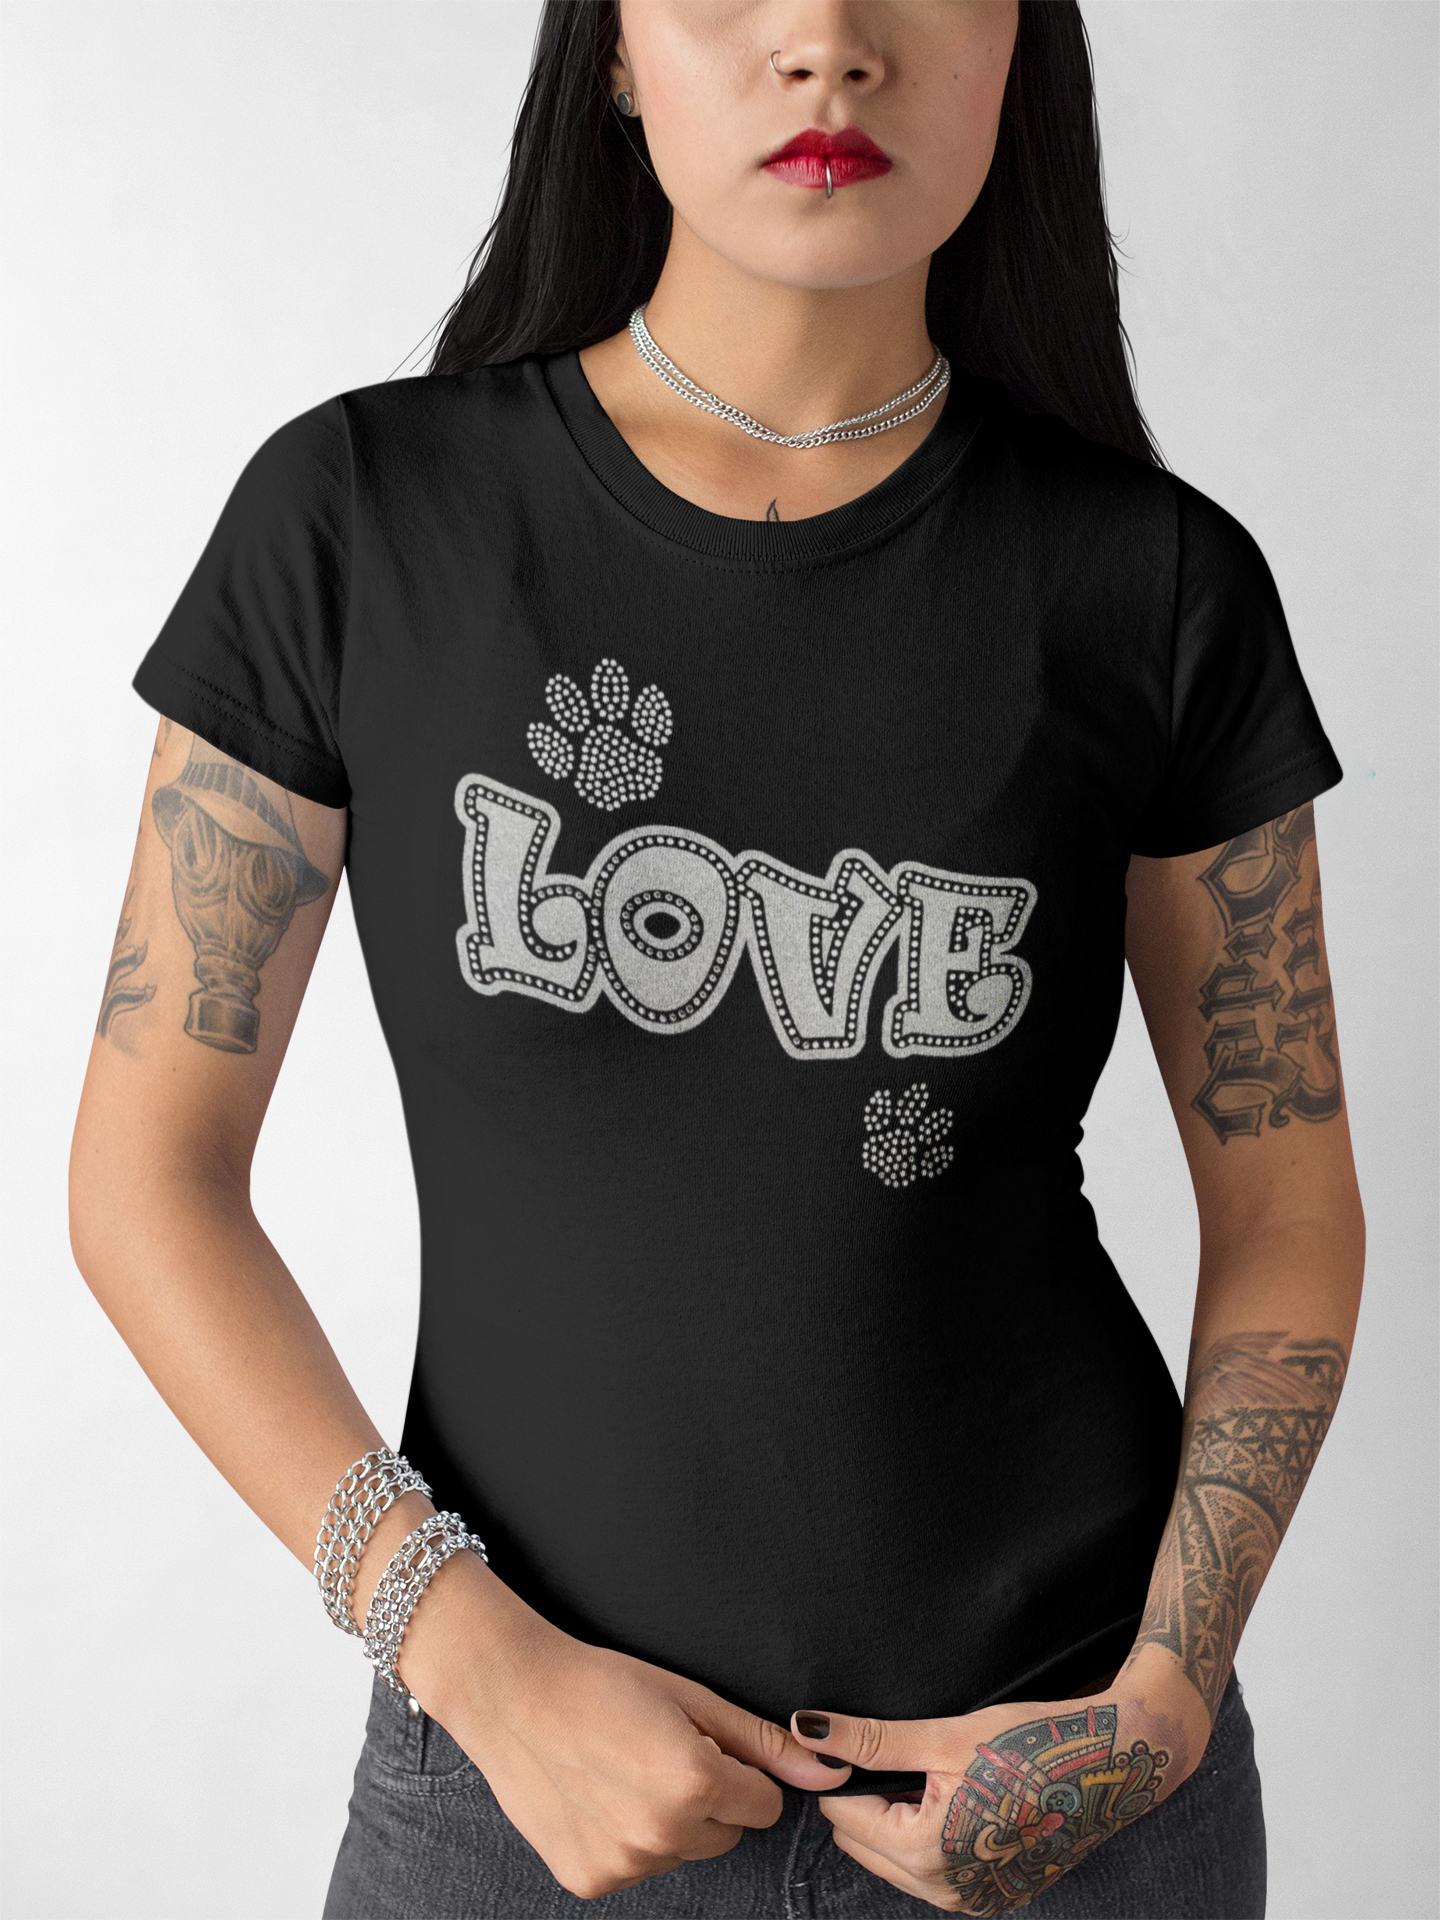 Love with Paws Rhinestones and HTV Black Crew Neck Women's T-Shirts